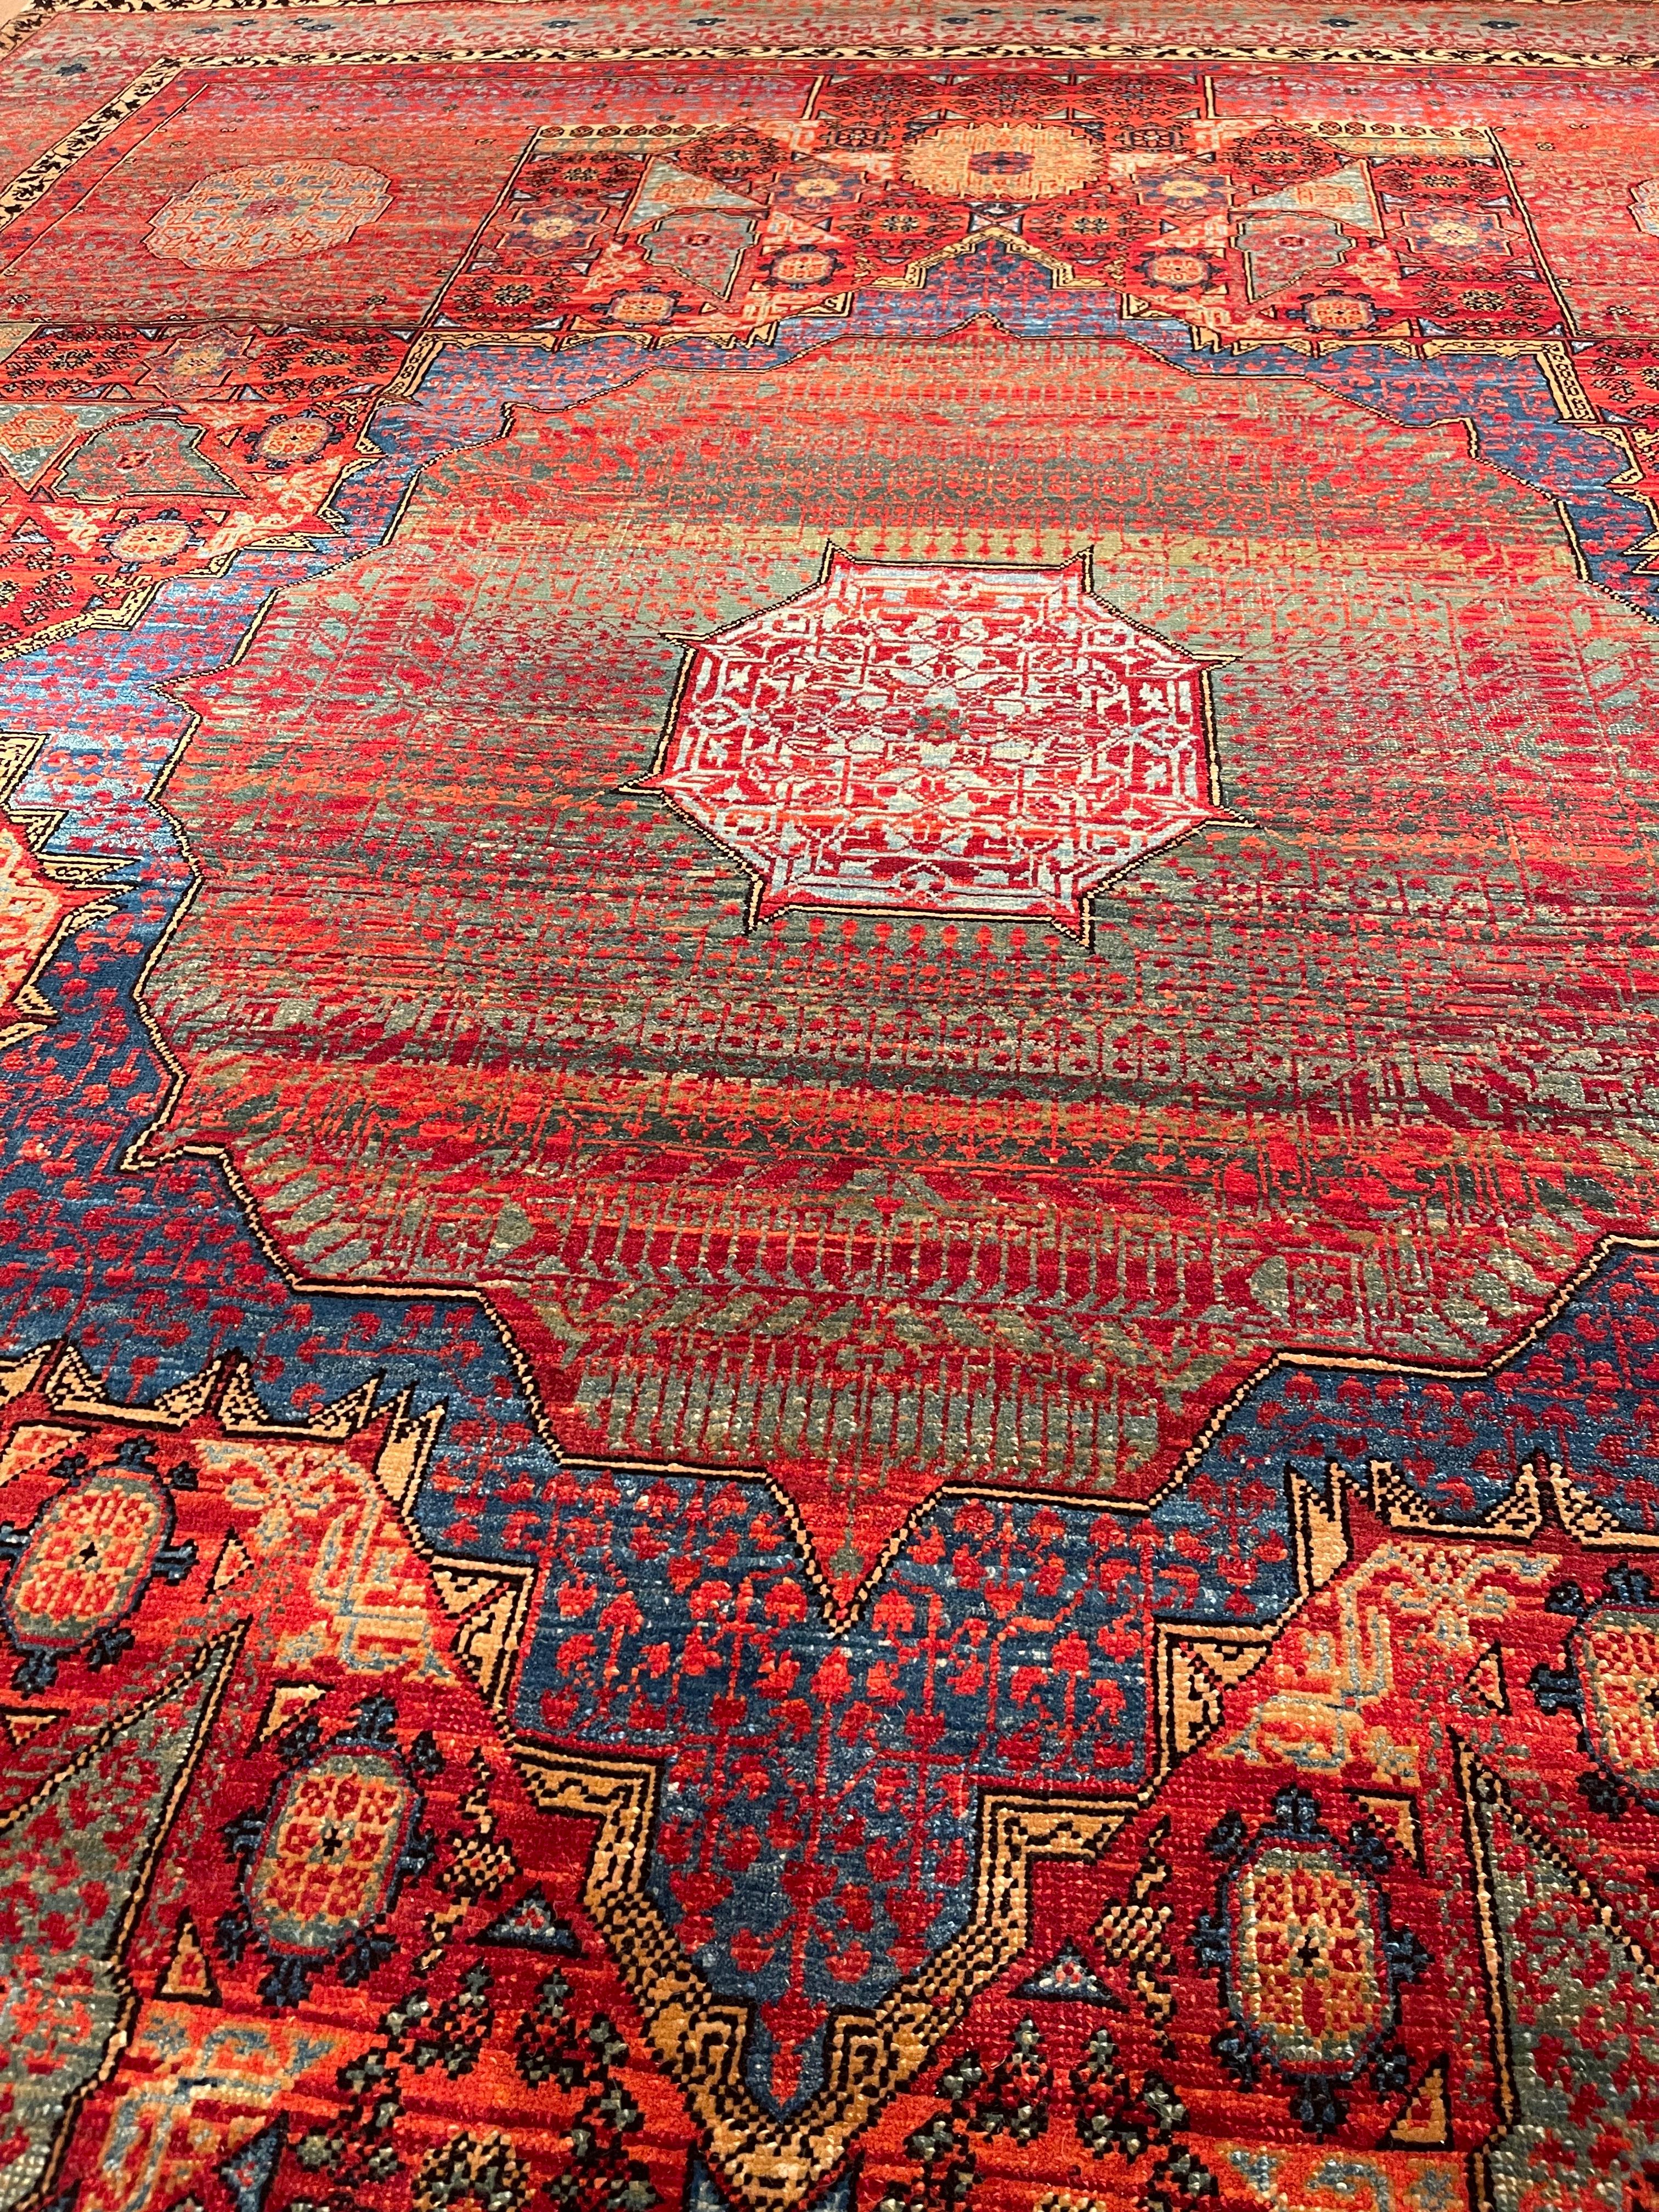 Contemporary Ararat Rugs Mamluk Carpet with Central Star 16th Century Revival, Natural Dyed For Sale